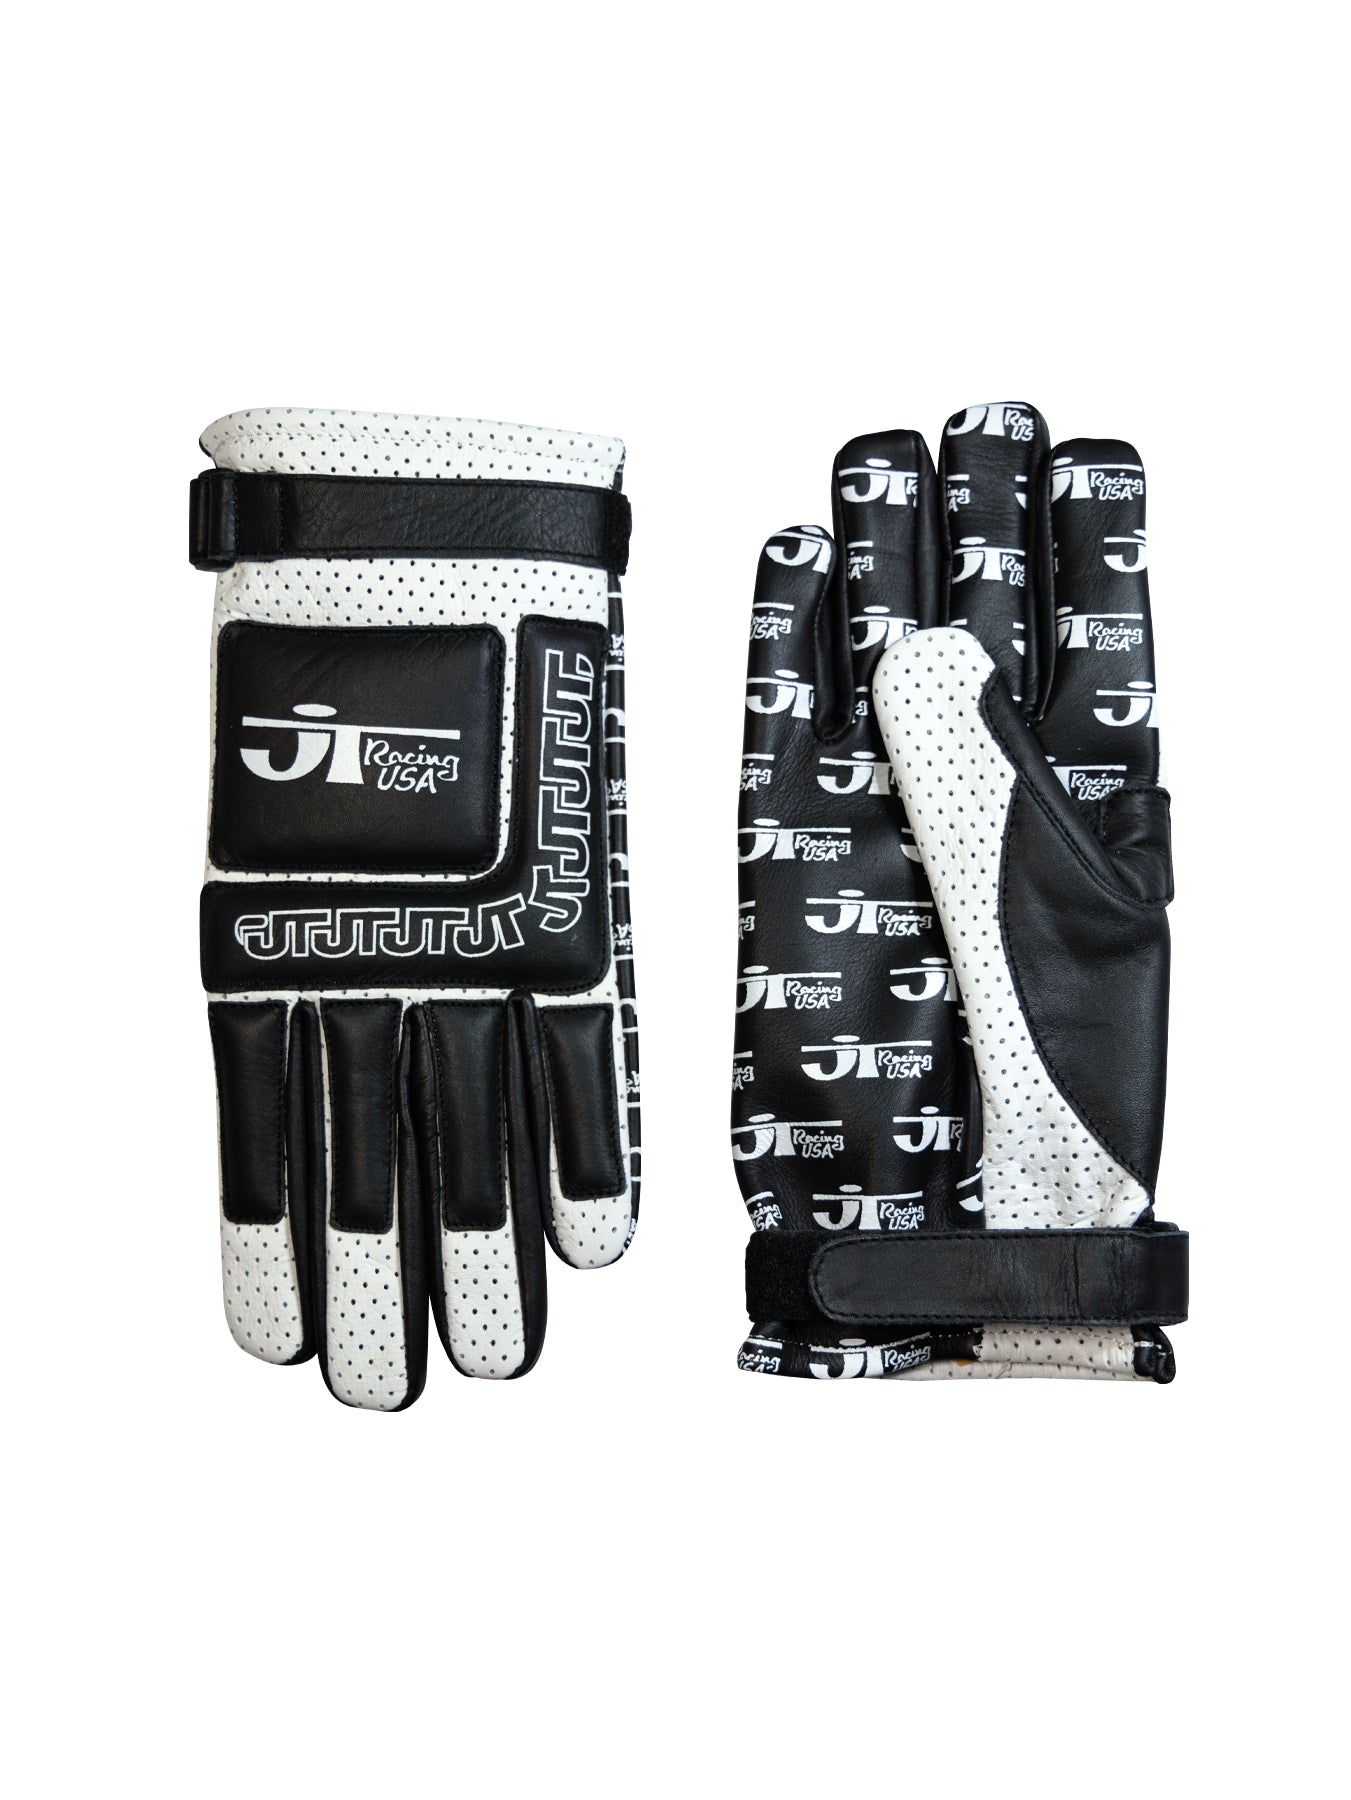 Gloves and Accessories – JT Racing USA